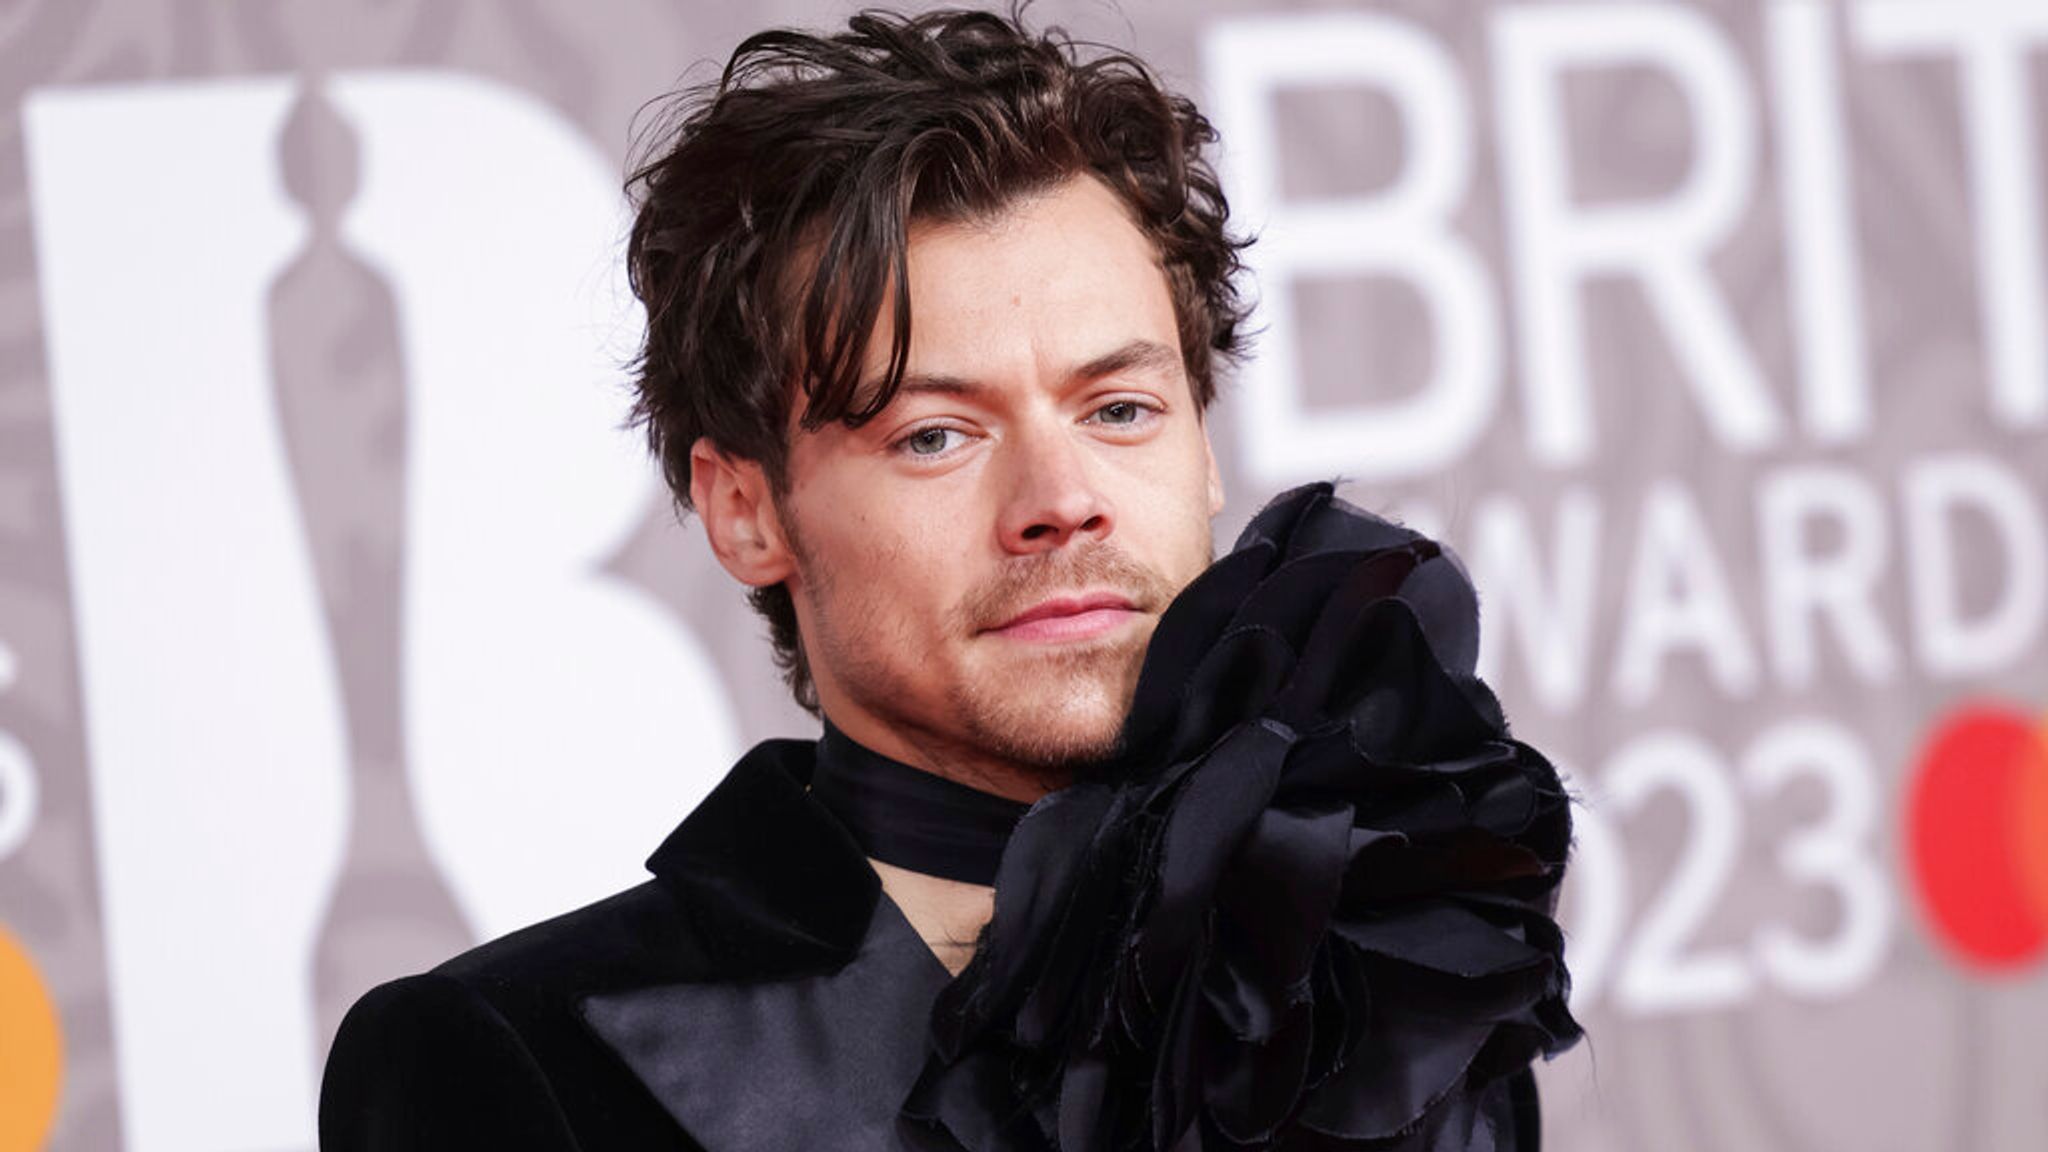 Harry Styles surprises fans with new haircut | Ents & Arts News